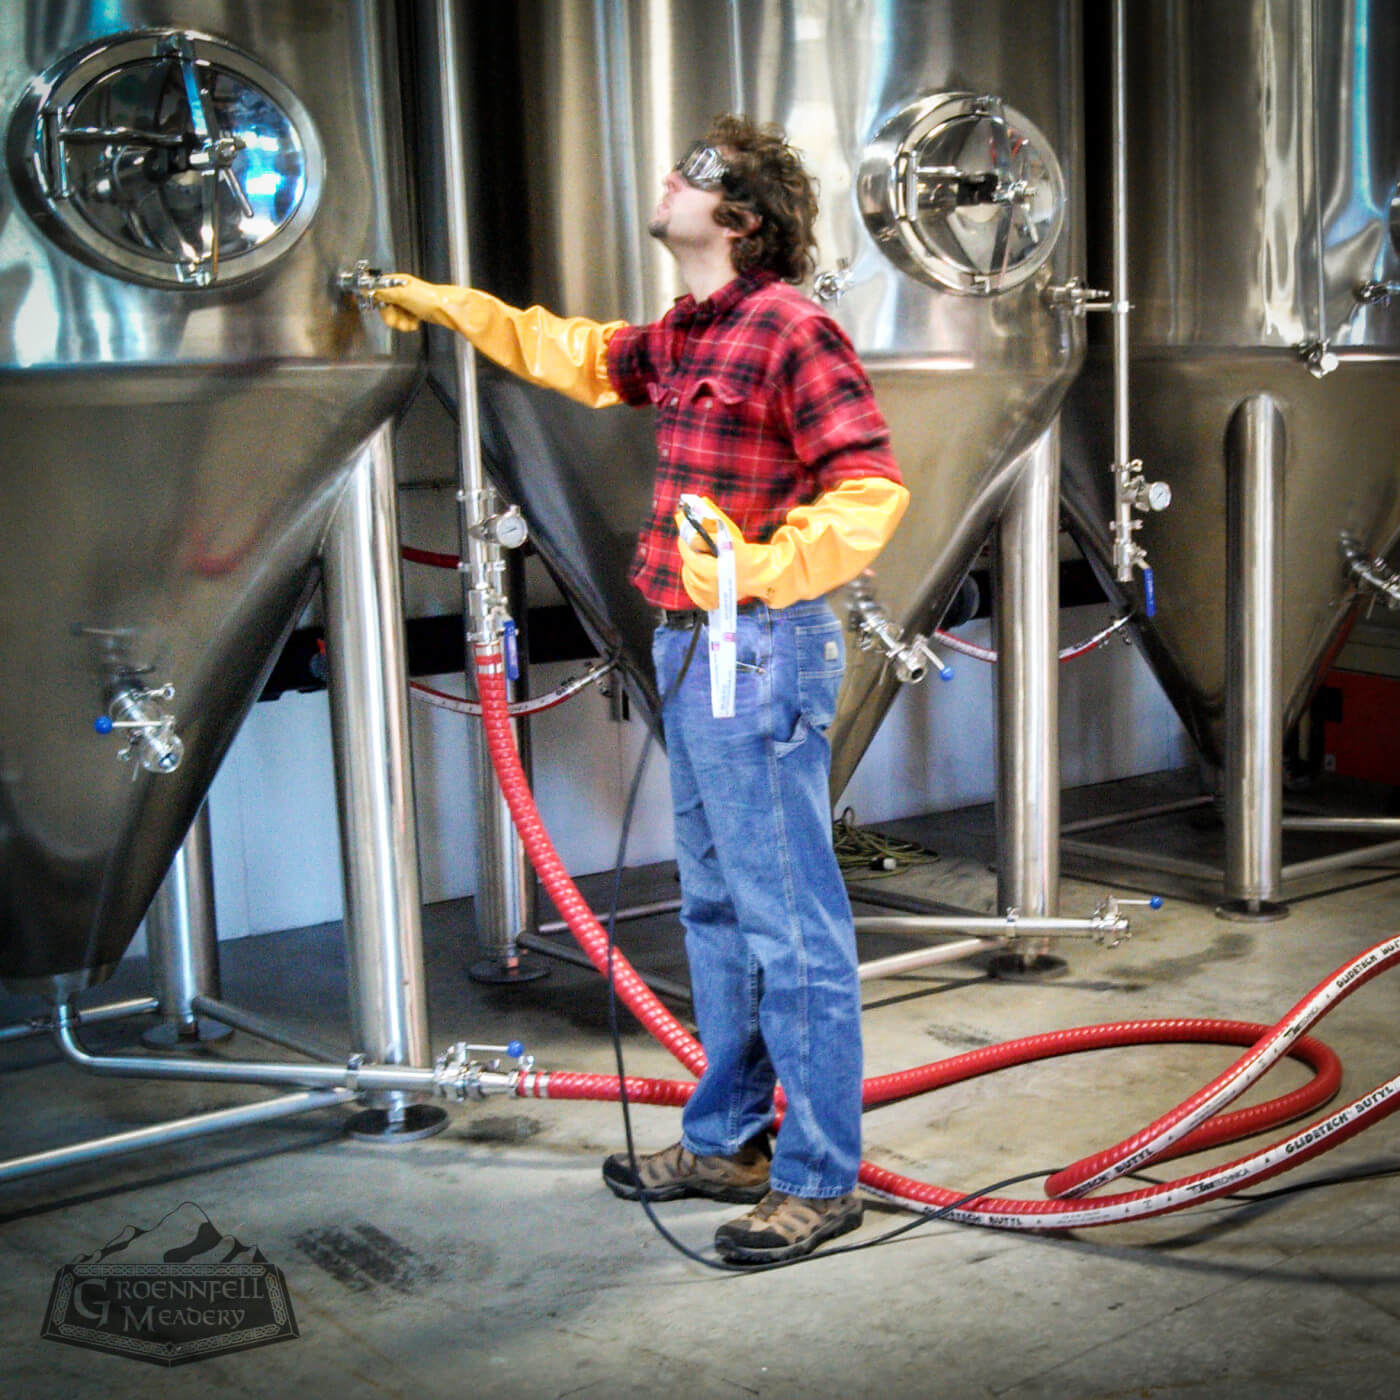 Cleaning and Sanitizing Equipment at Groennfell Meadery